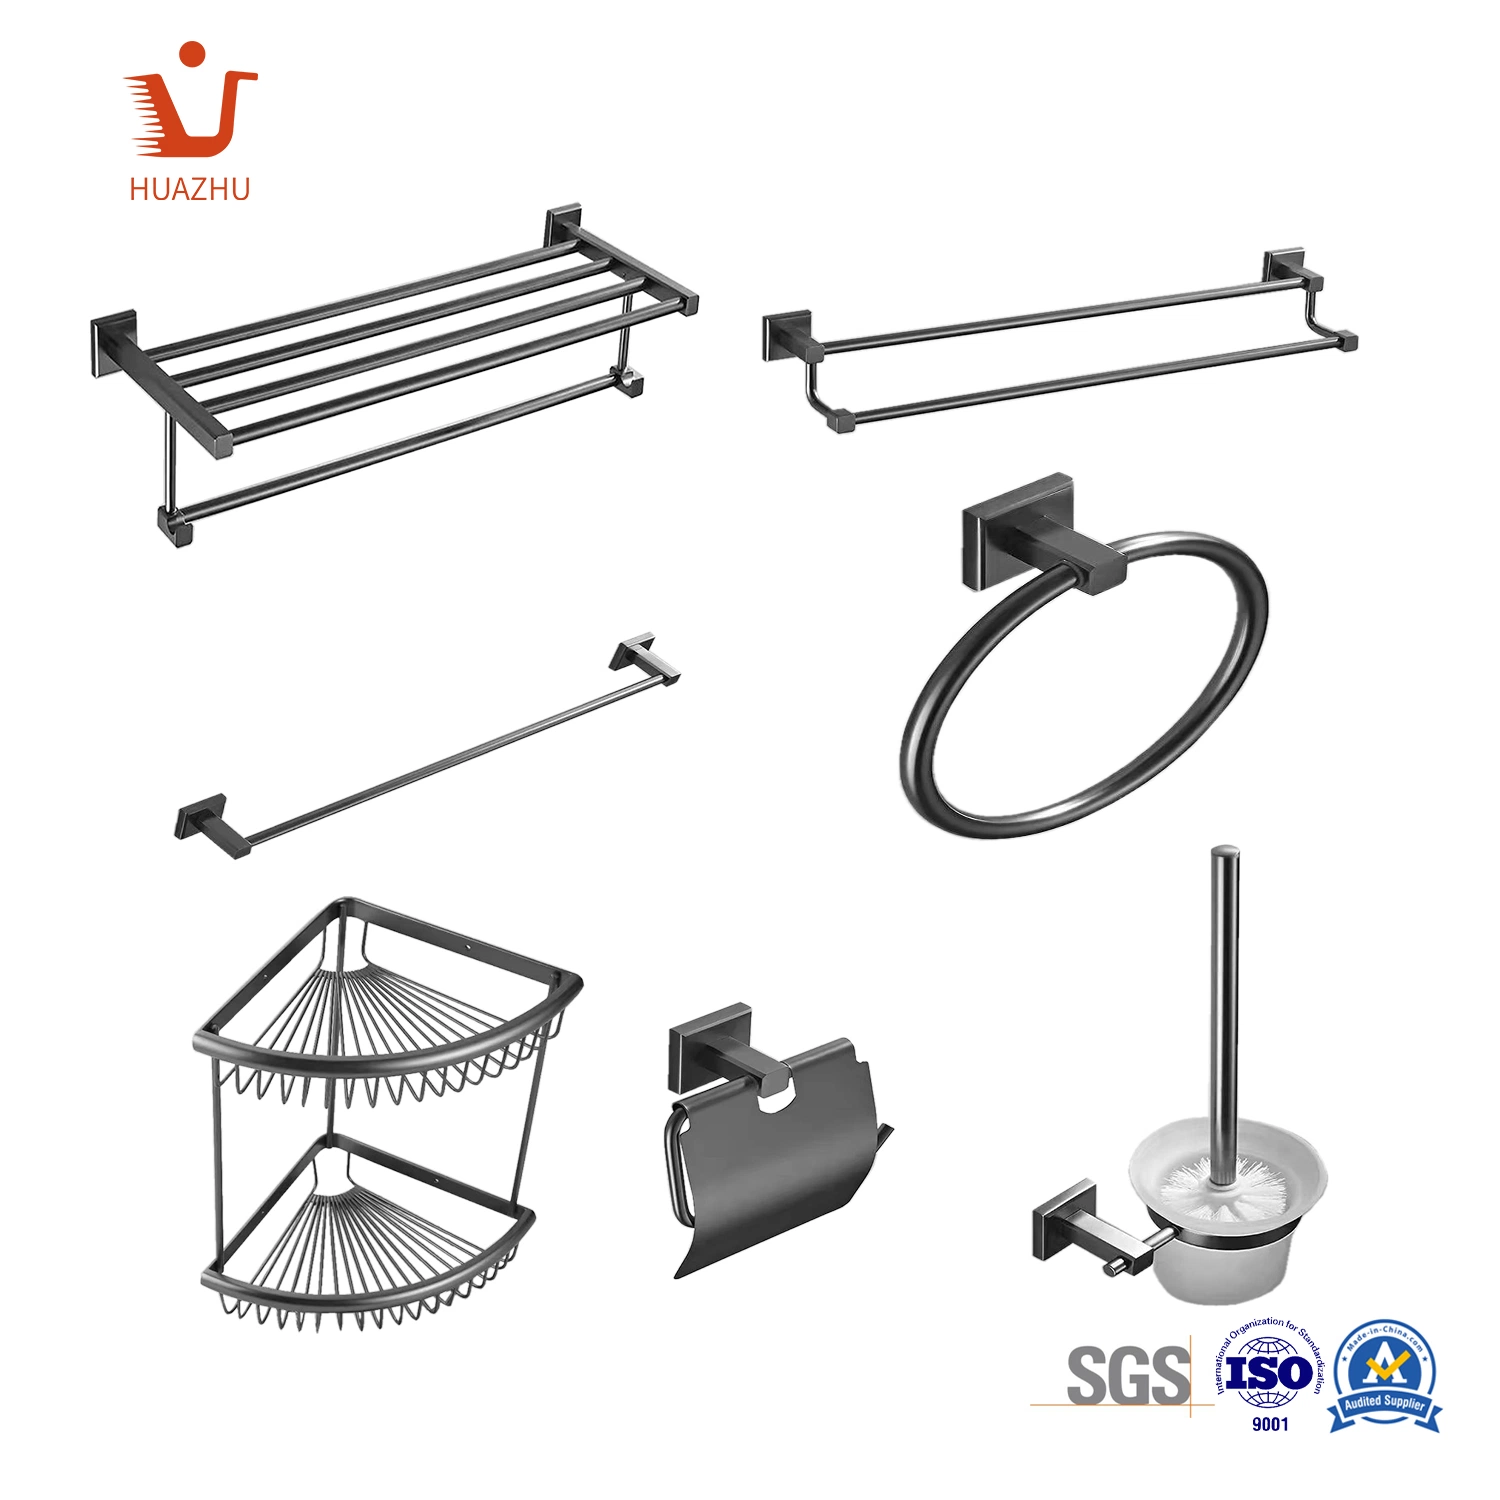 Quality Assurance Customize Zamak Stainless Steel Bathroom Hardware Sets SUS304 Accessories